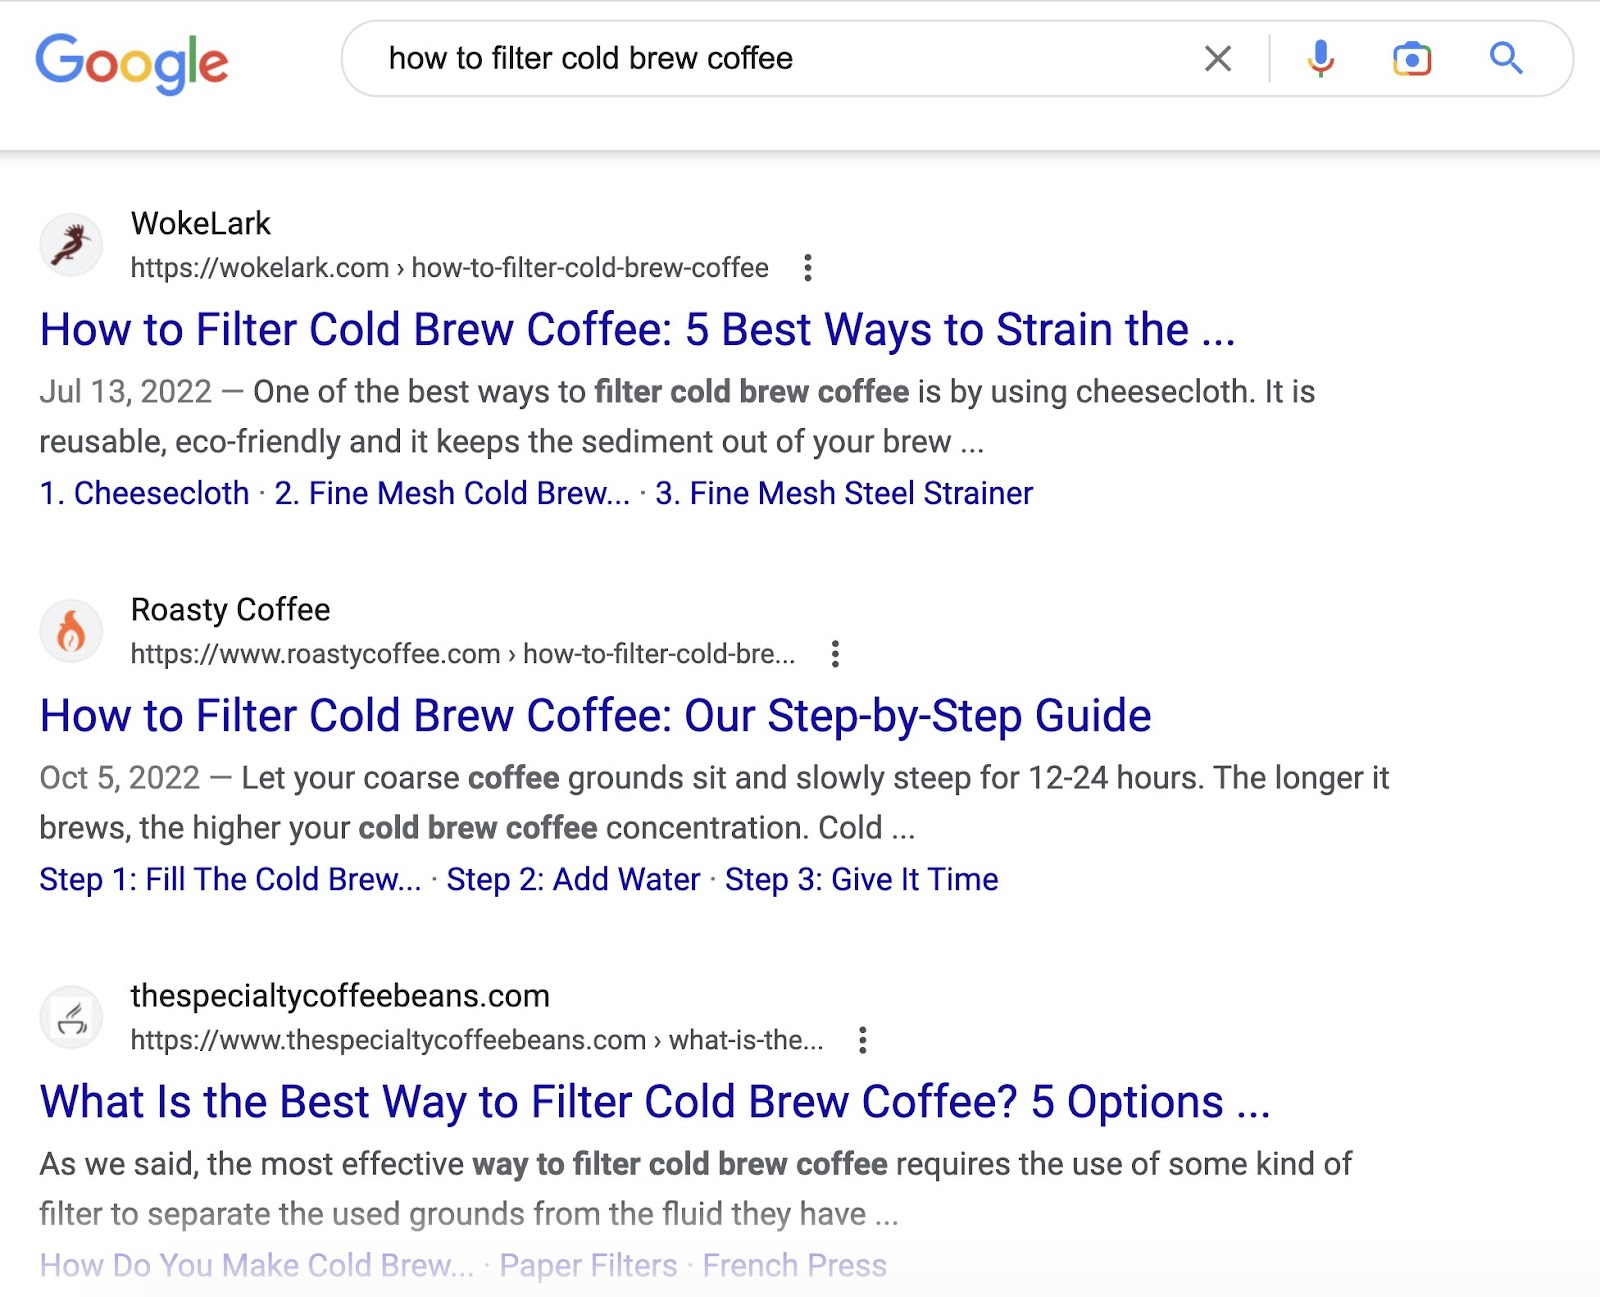 Google search for “how to filter cold brew coffee”